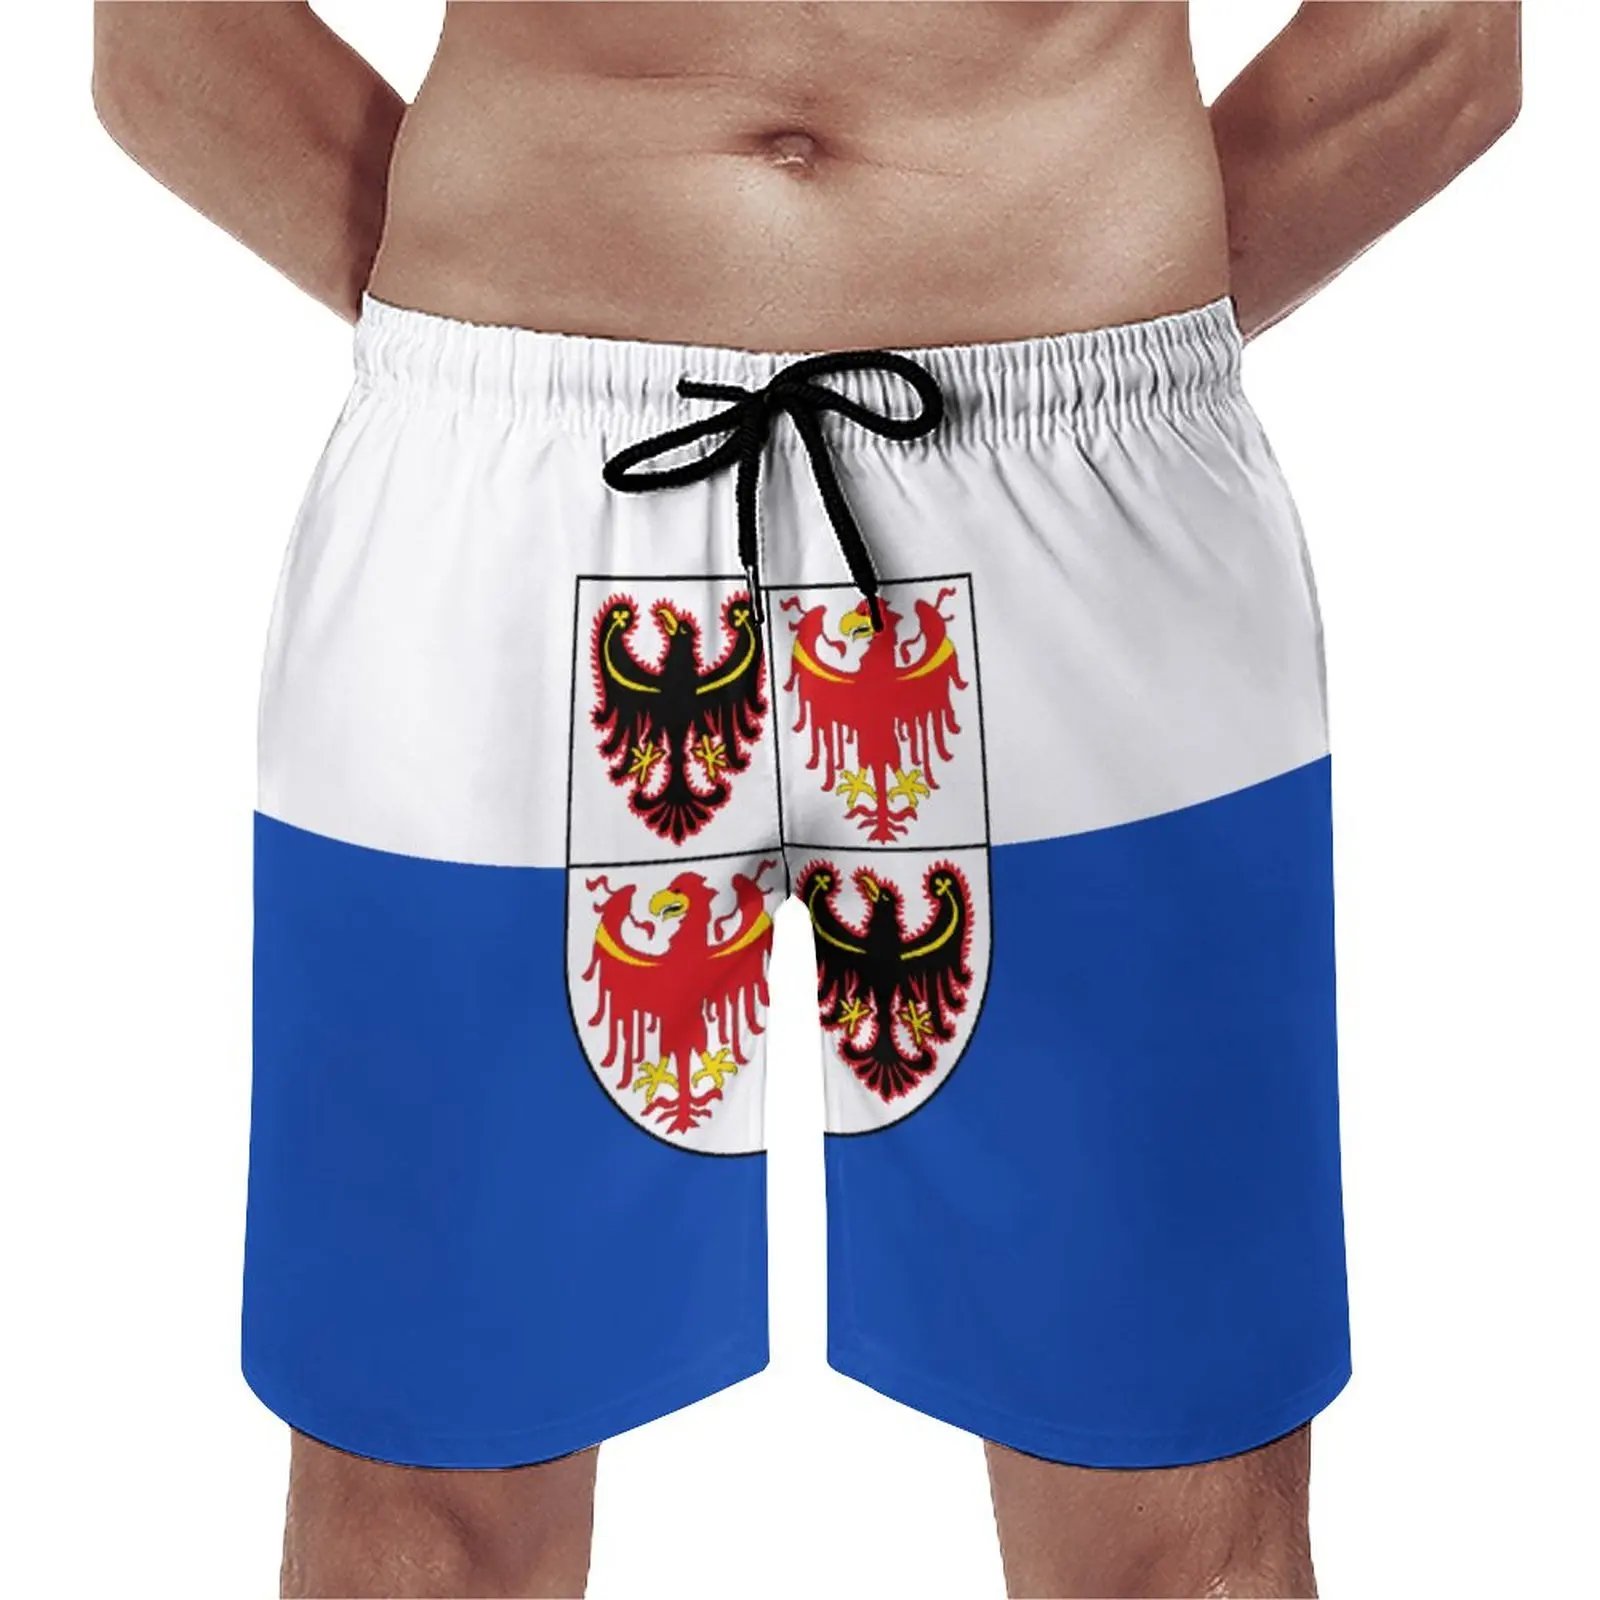 

Men's Beach Shorts Anime Causal Flag of Trentino South Tyrol Breathable Quick Dry Unique Casual Adjustable Drawcord Loose Stretc